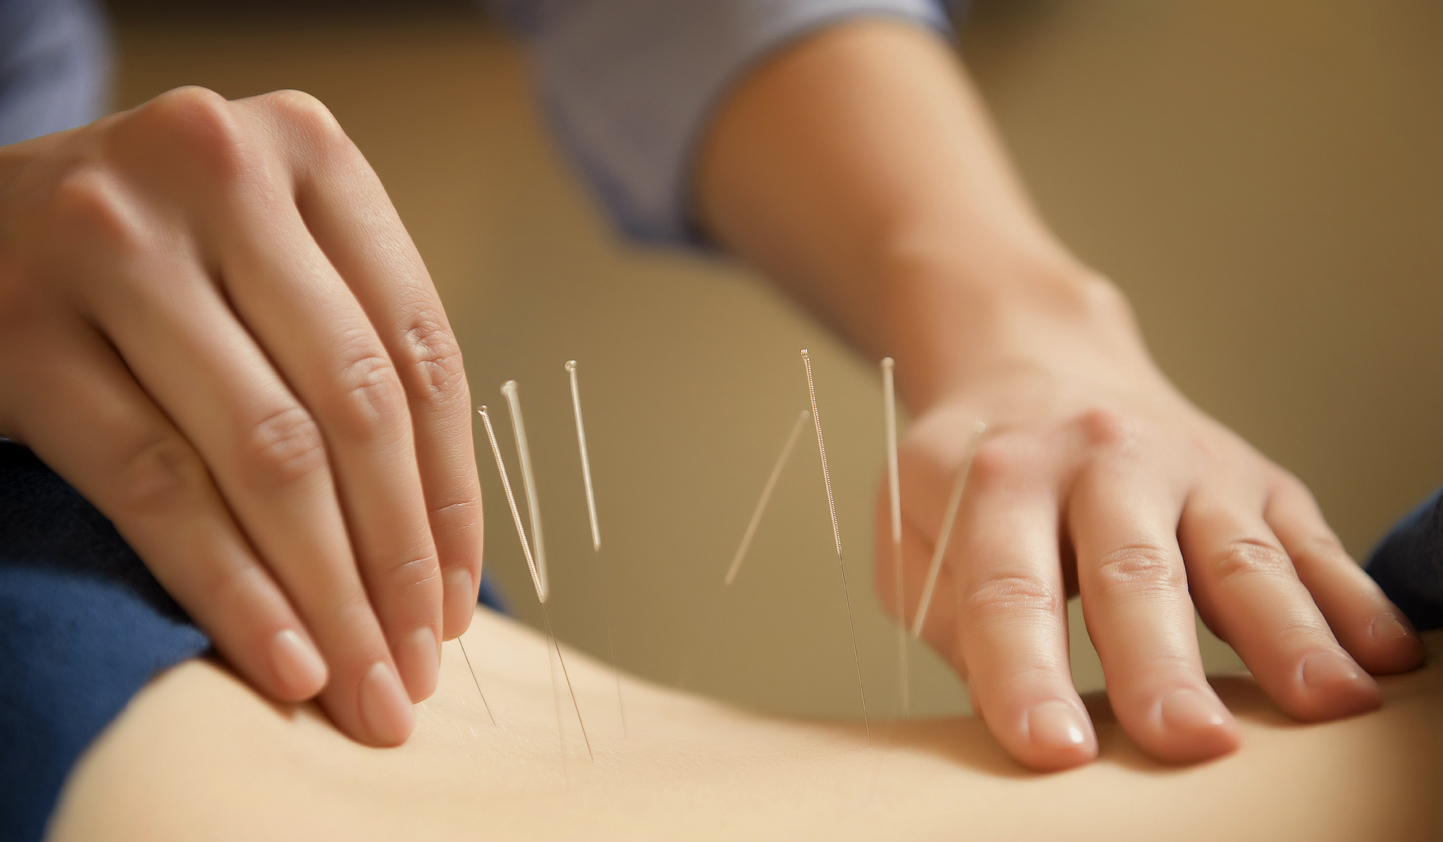 How much do you know about acupuncture